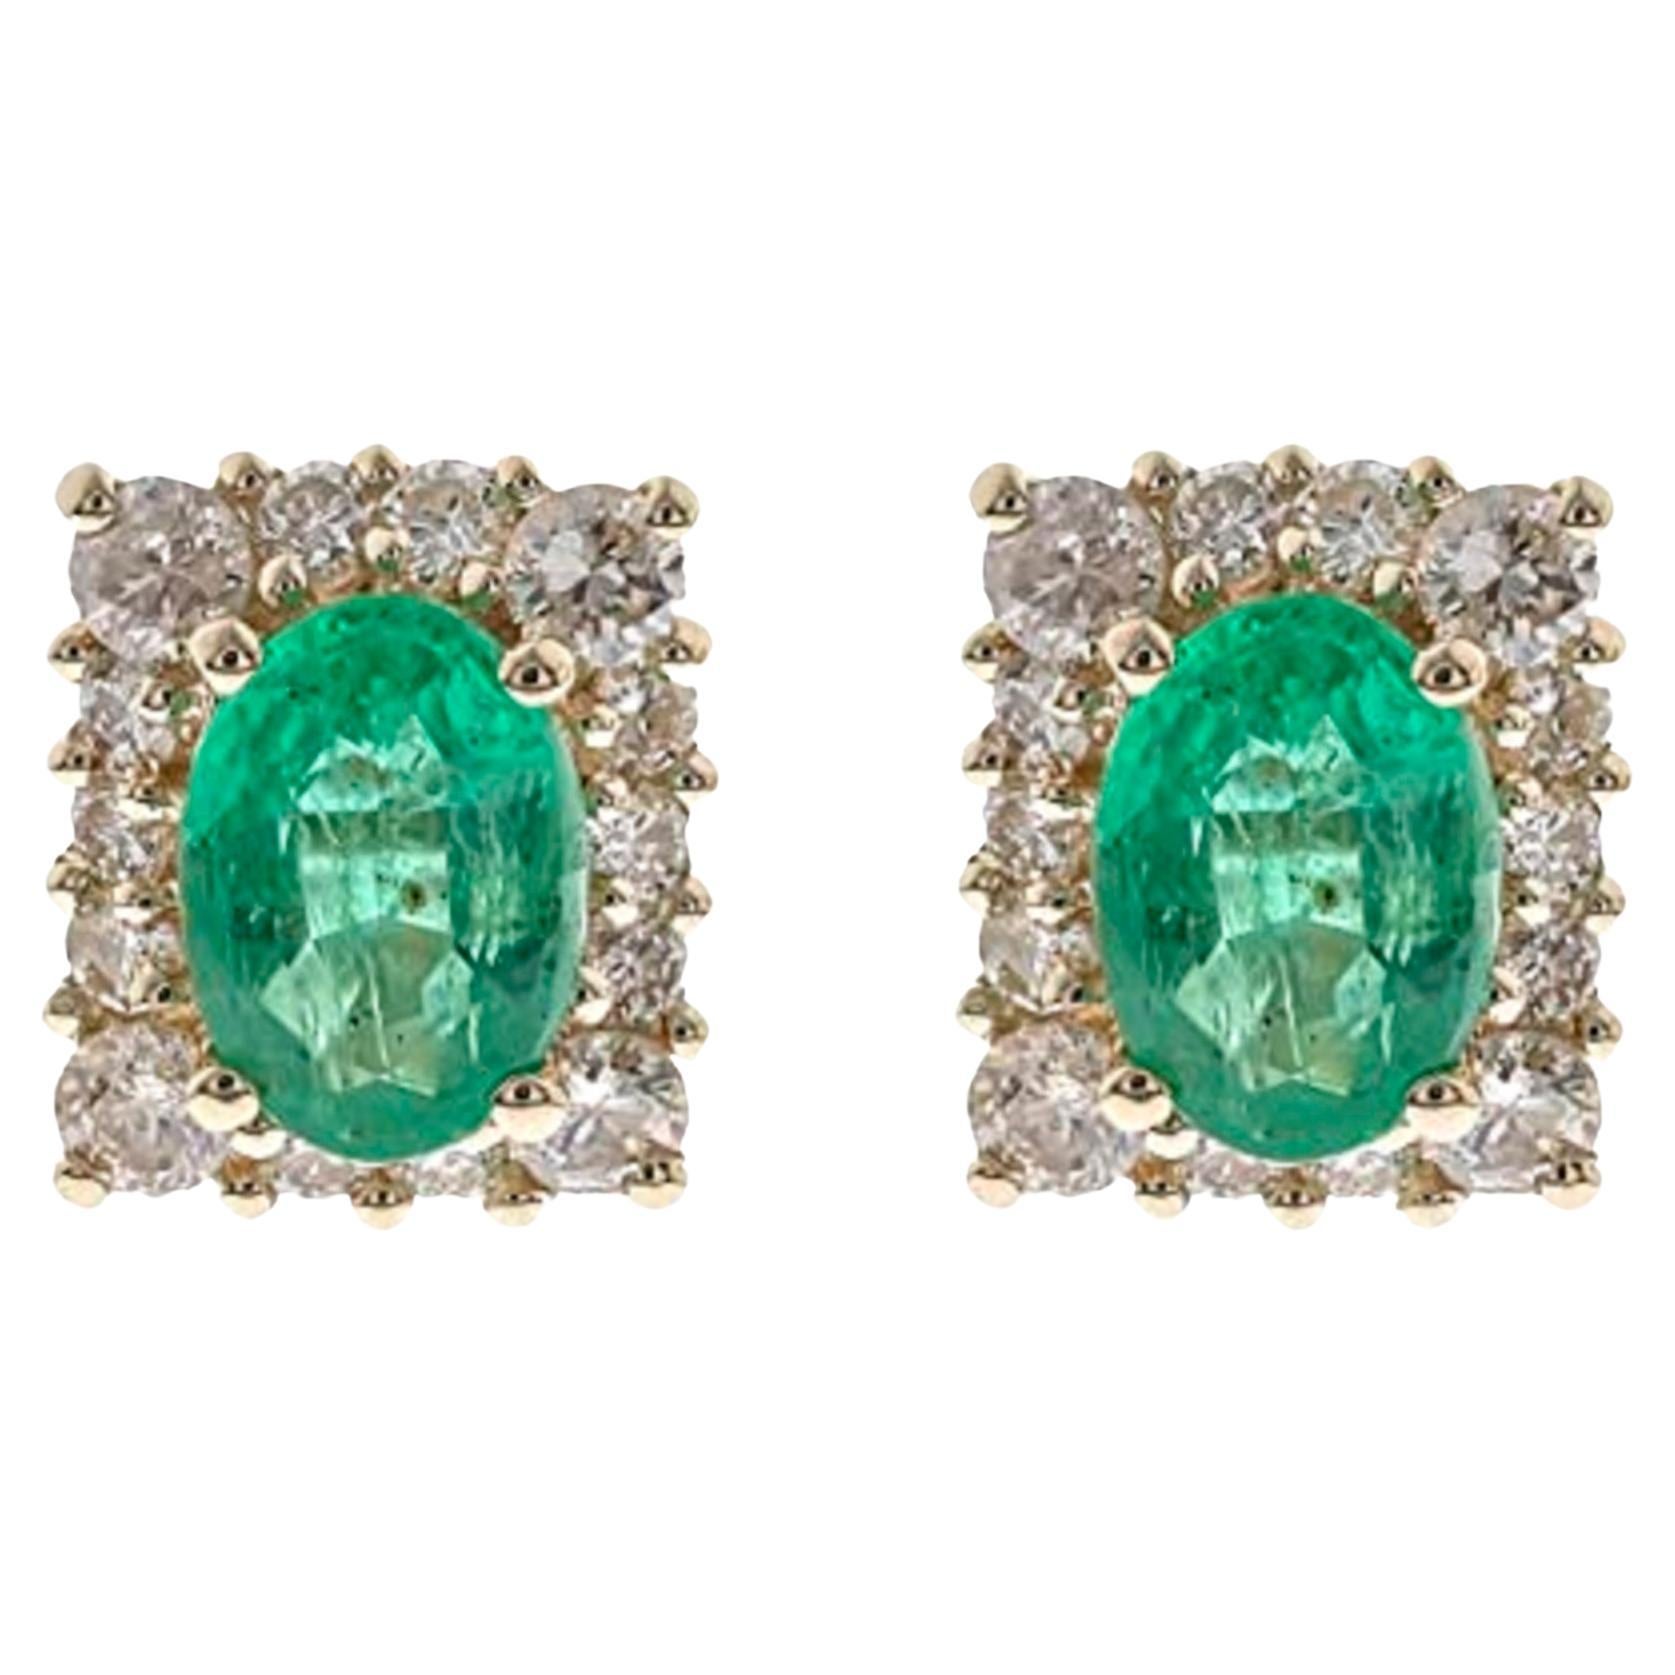  Gin & Grace 14K Yellow Gold Natural Zambian Emerald Stud Earrings with Diamonds For Sale